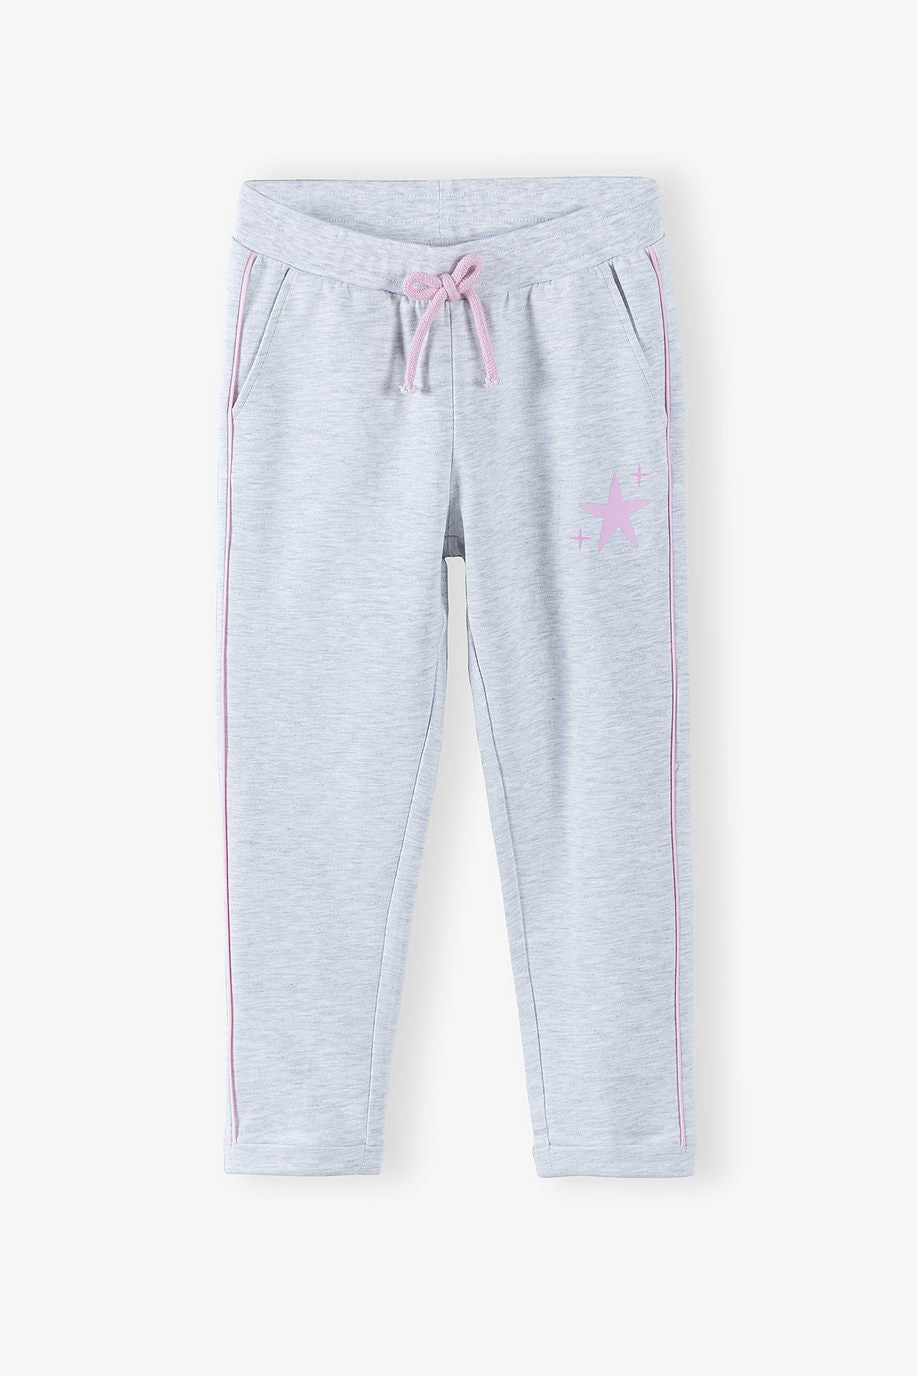 Girls' grey tracksuits with a pink star and stripes